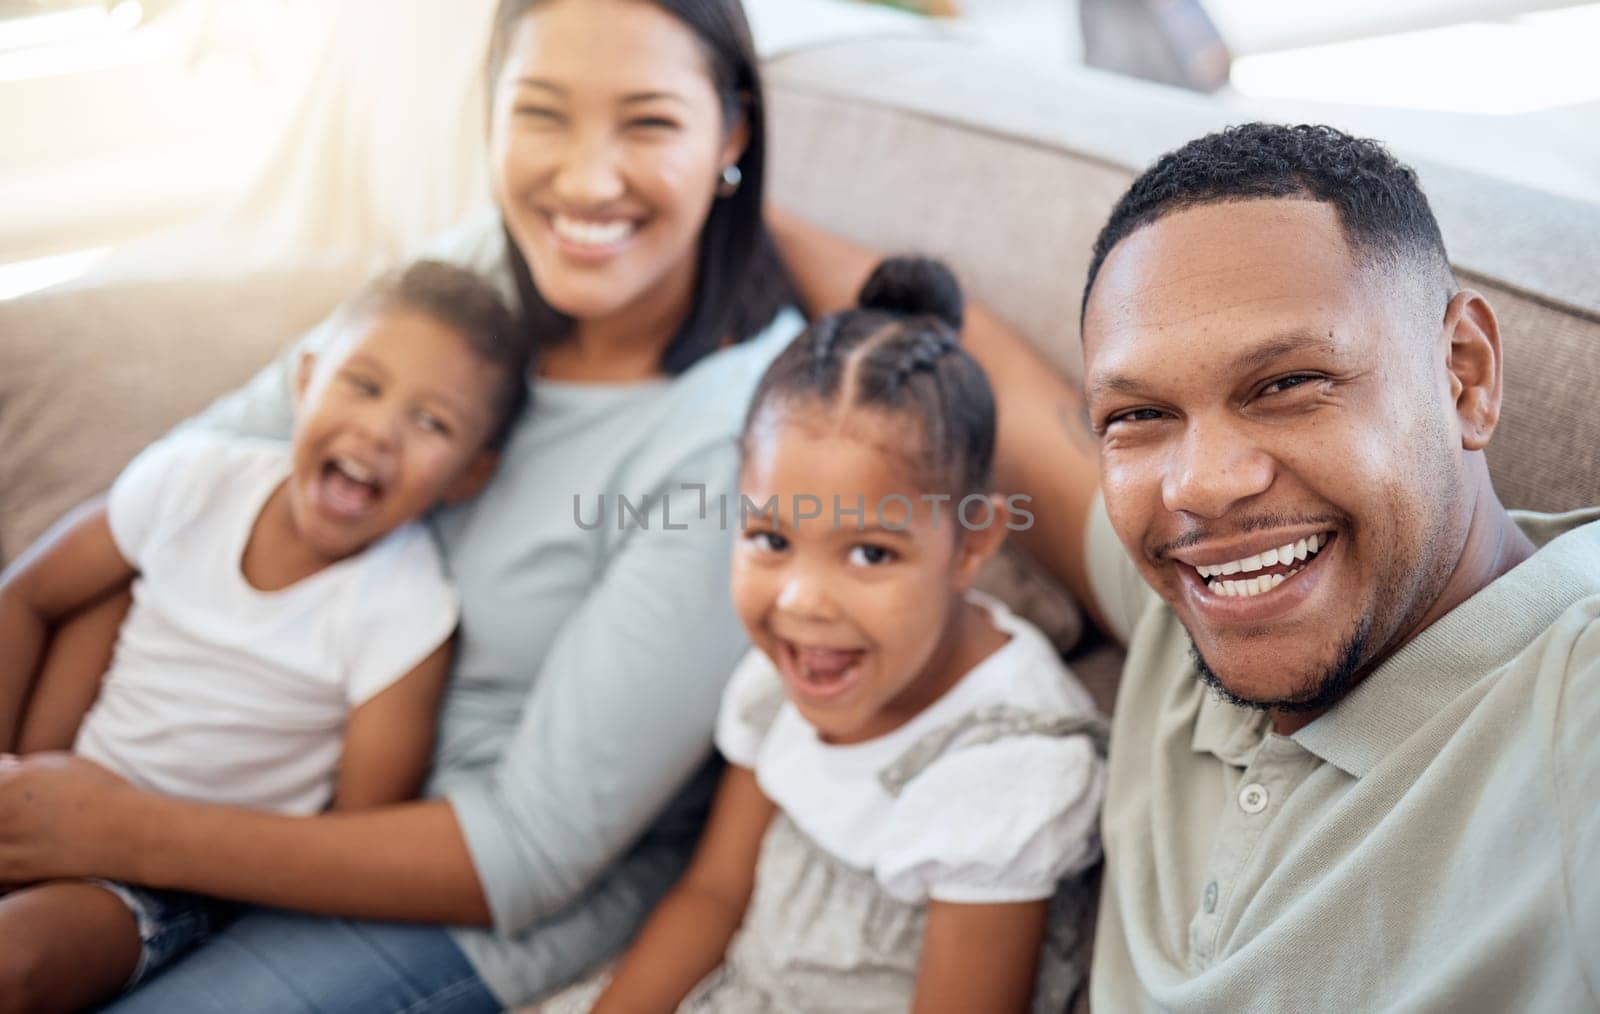 Happy, relax and selfie with family on sofa for smile, support or social media app together. Technology, photographer and portrait of parents with children in living room at home for bonding and care by YuriArcurs